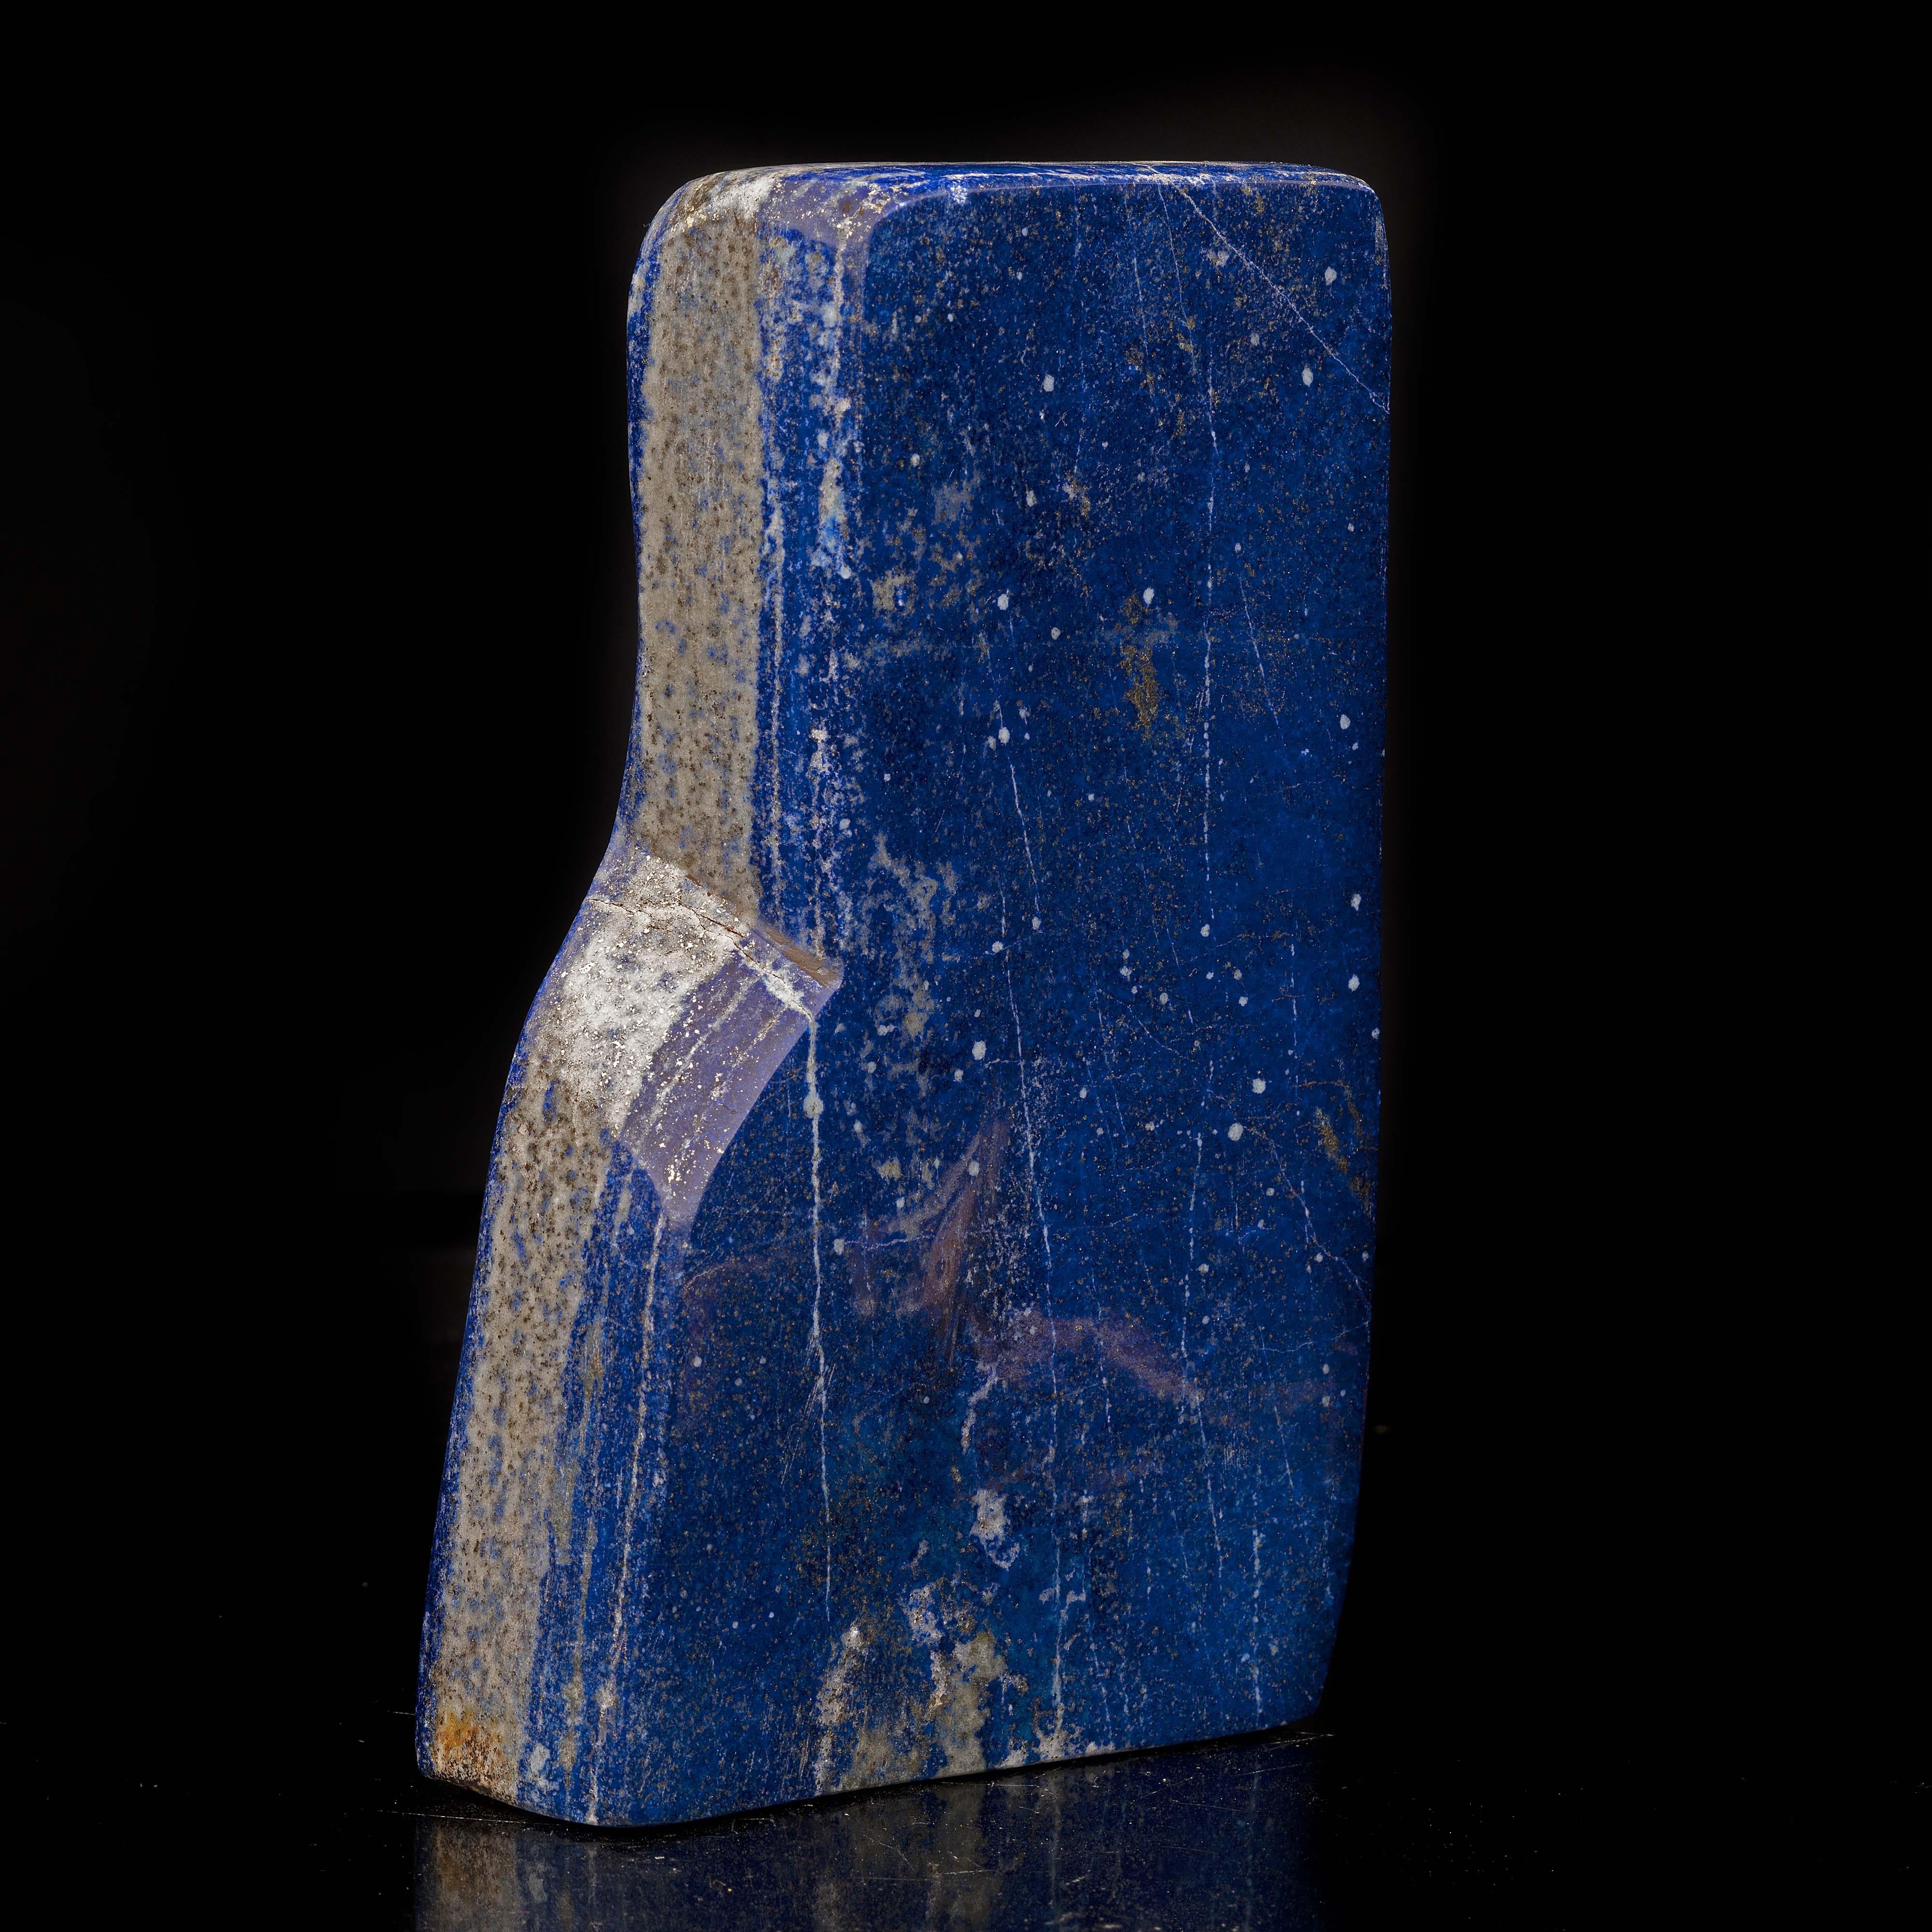 This gorgeous 3.33 lb hand-polished lapis lazuli freeform from Afghanistan features streaks of shimmering pyrite and white calcite deposits that appear like contrasting splatters on a vivid blue backdrop and create a uniquely painterly vibe. It